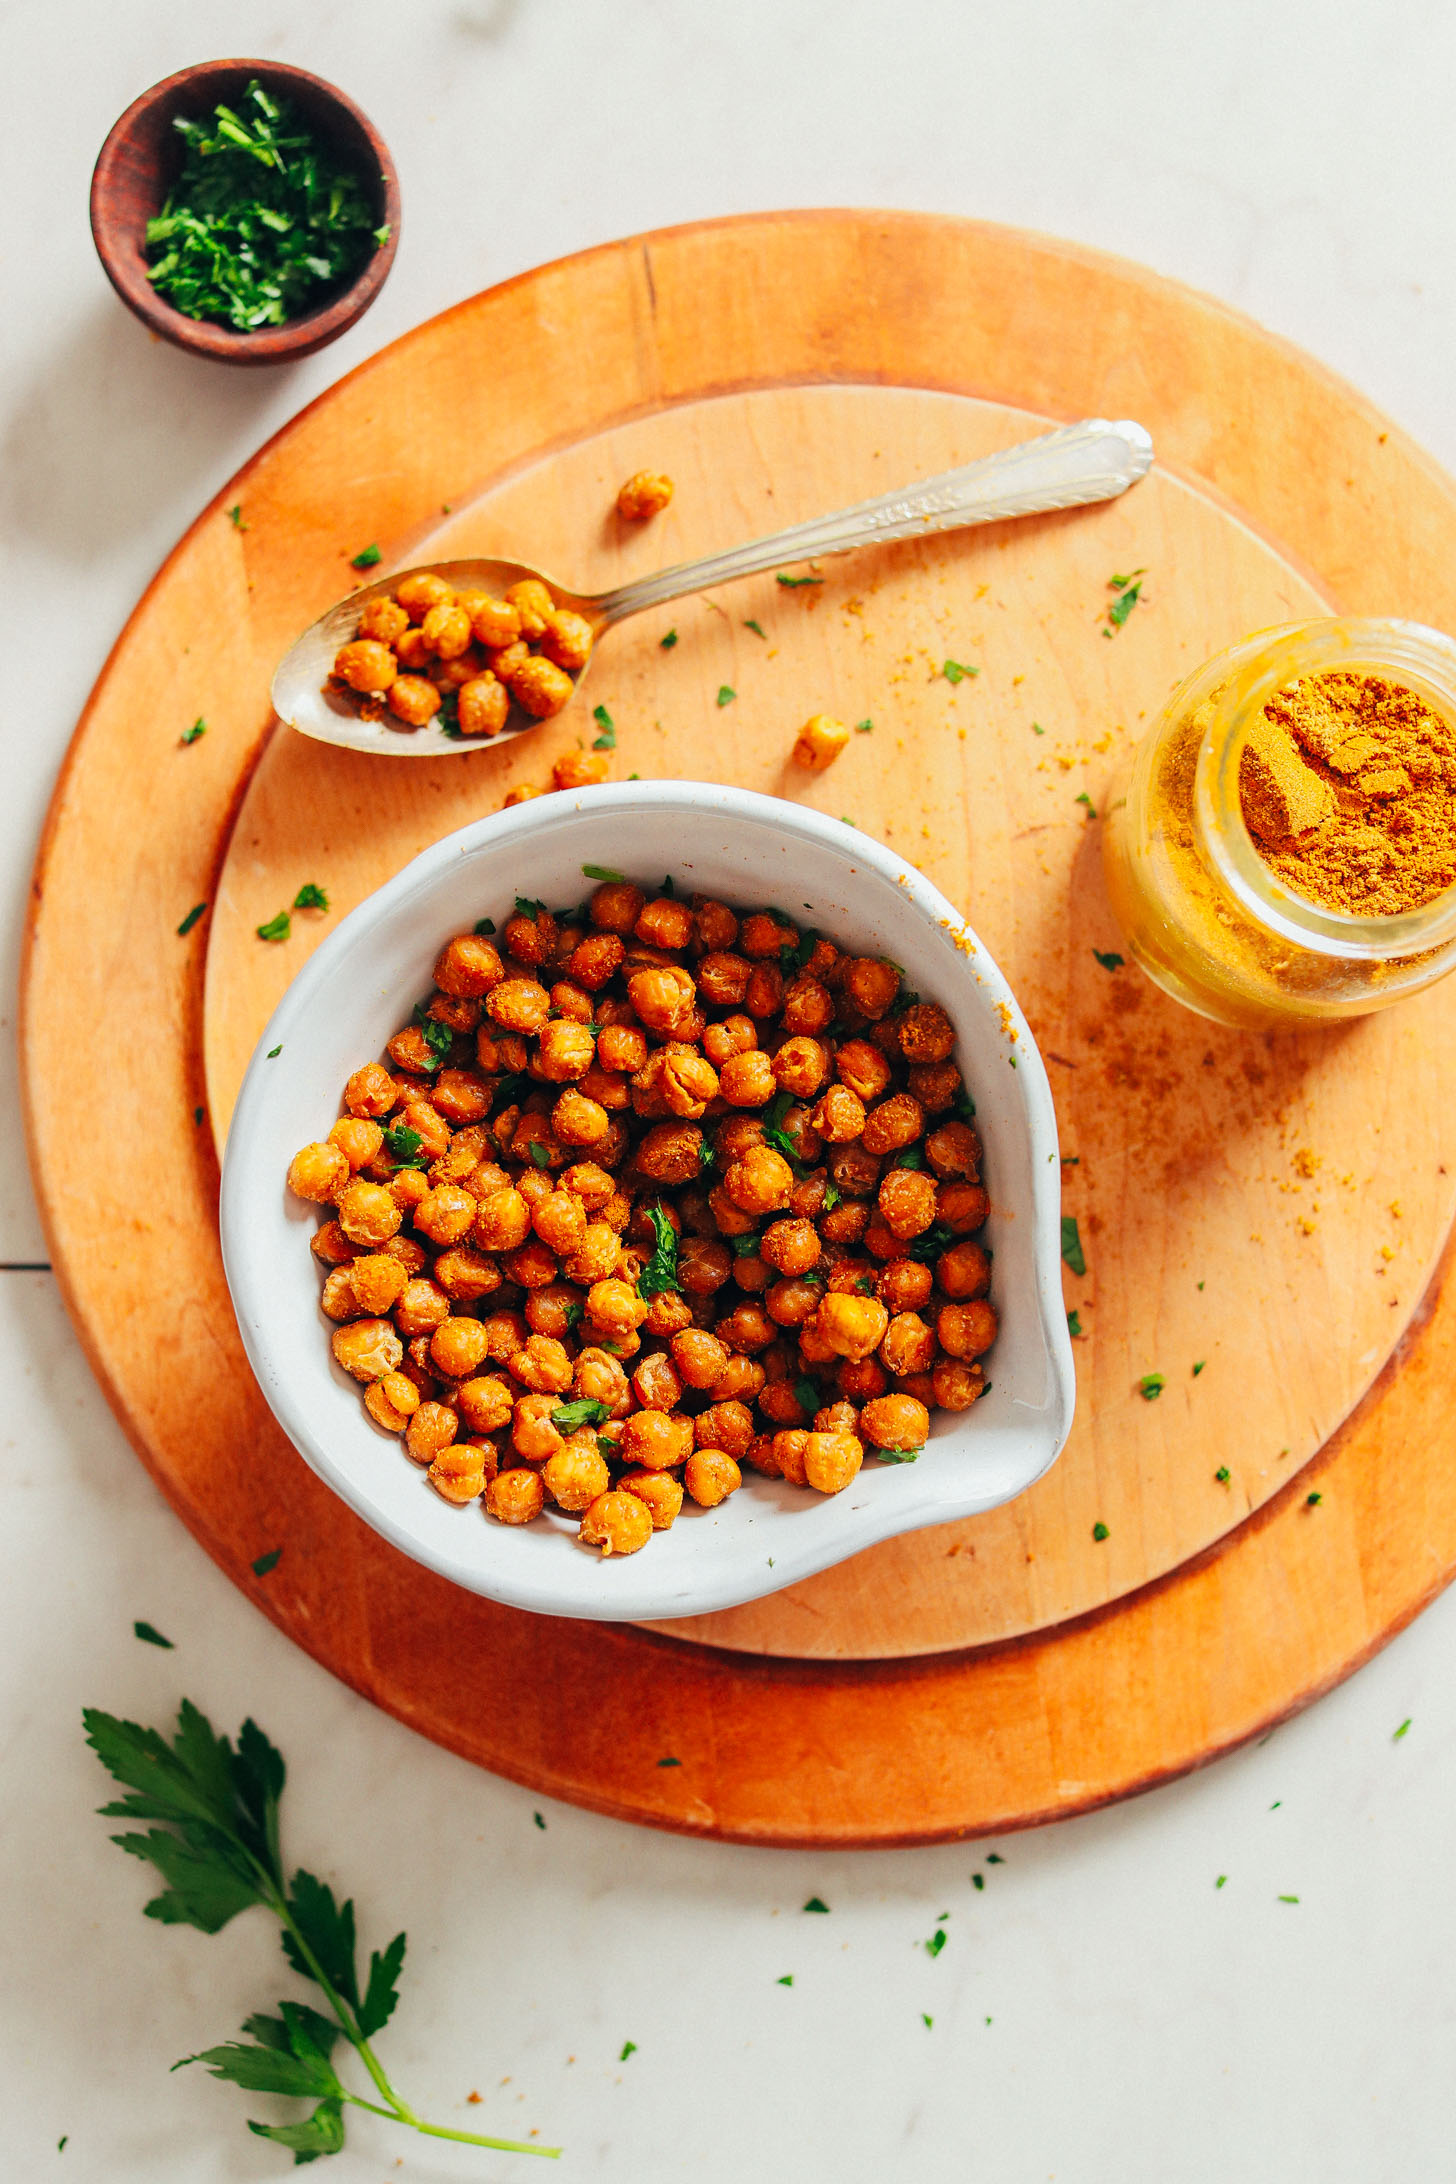 Wood cutting board with a bowl of Crispy Baked Chickpeas alongside fresh parsley, a spoonful of chickpeas, and curry powder